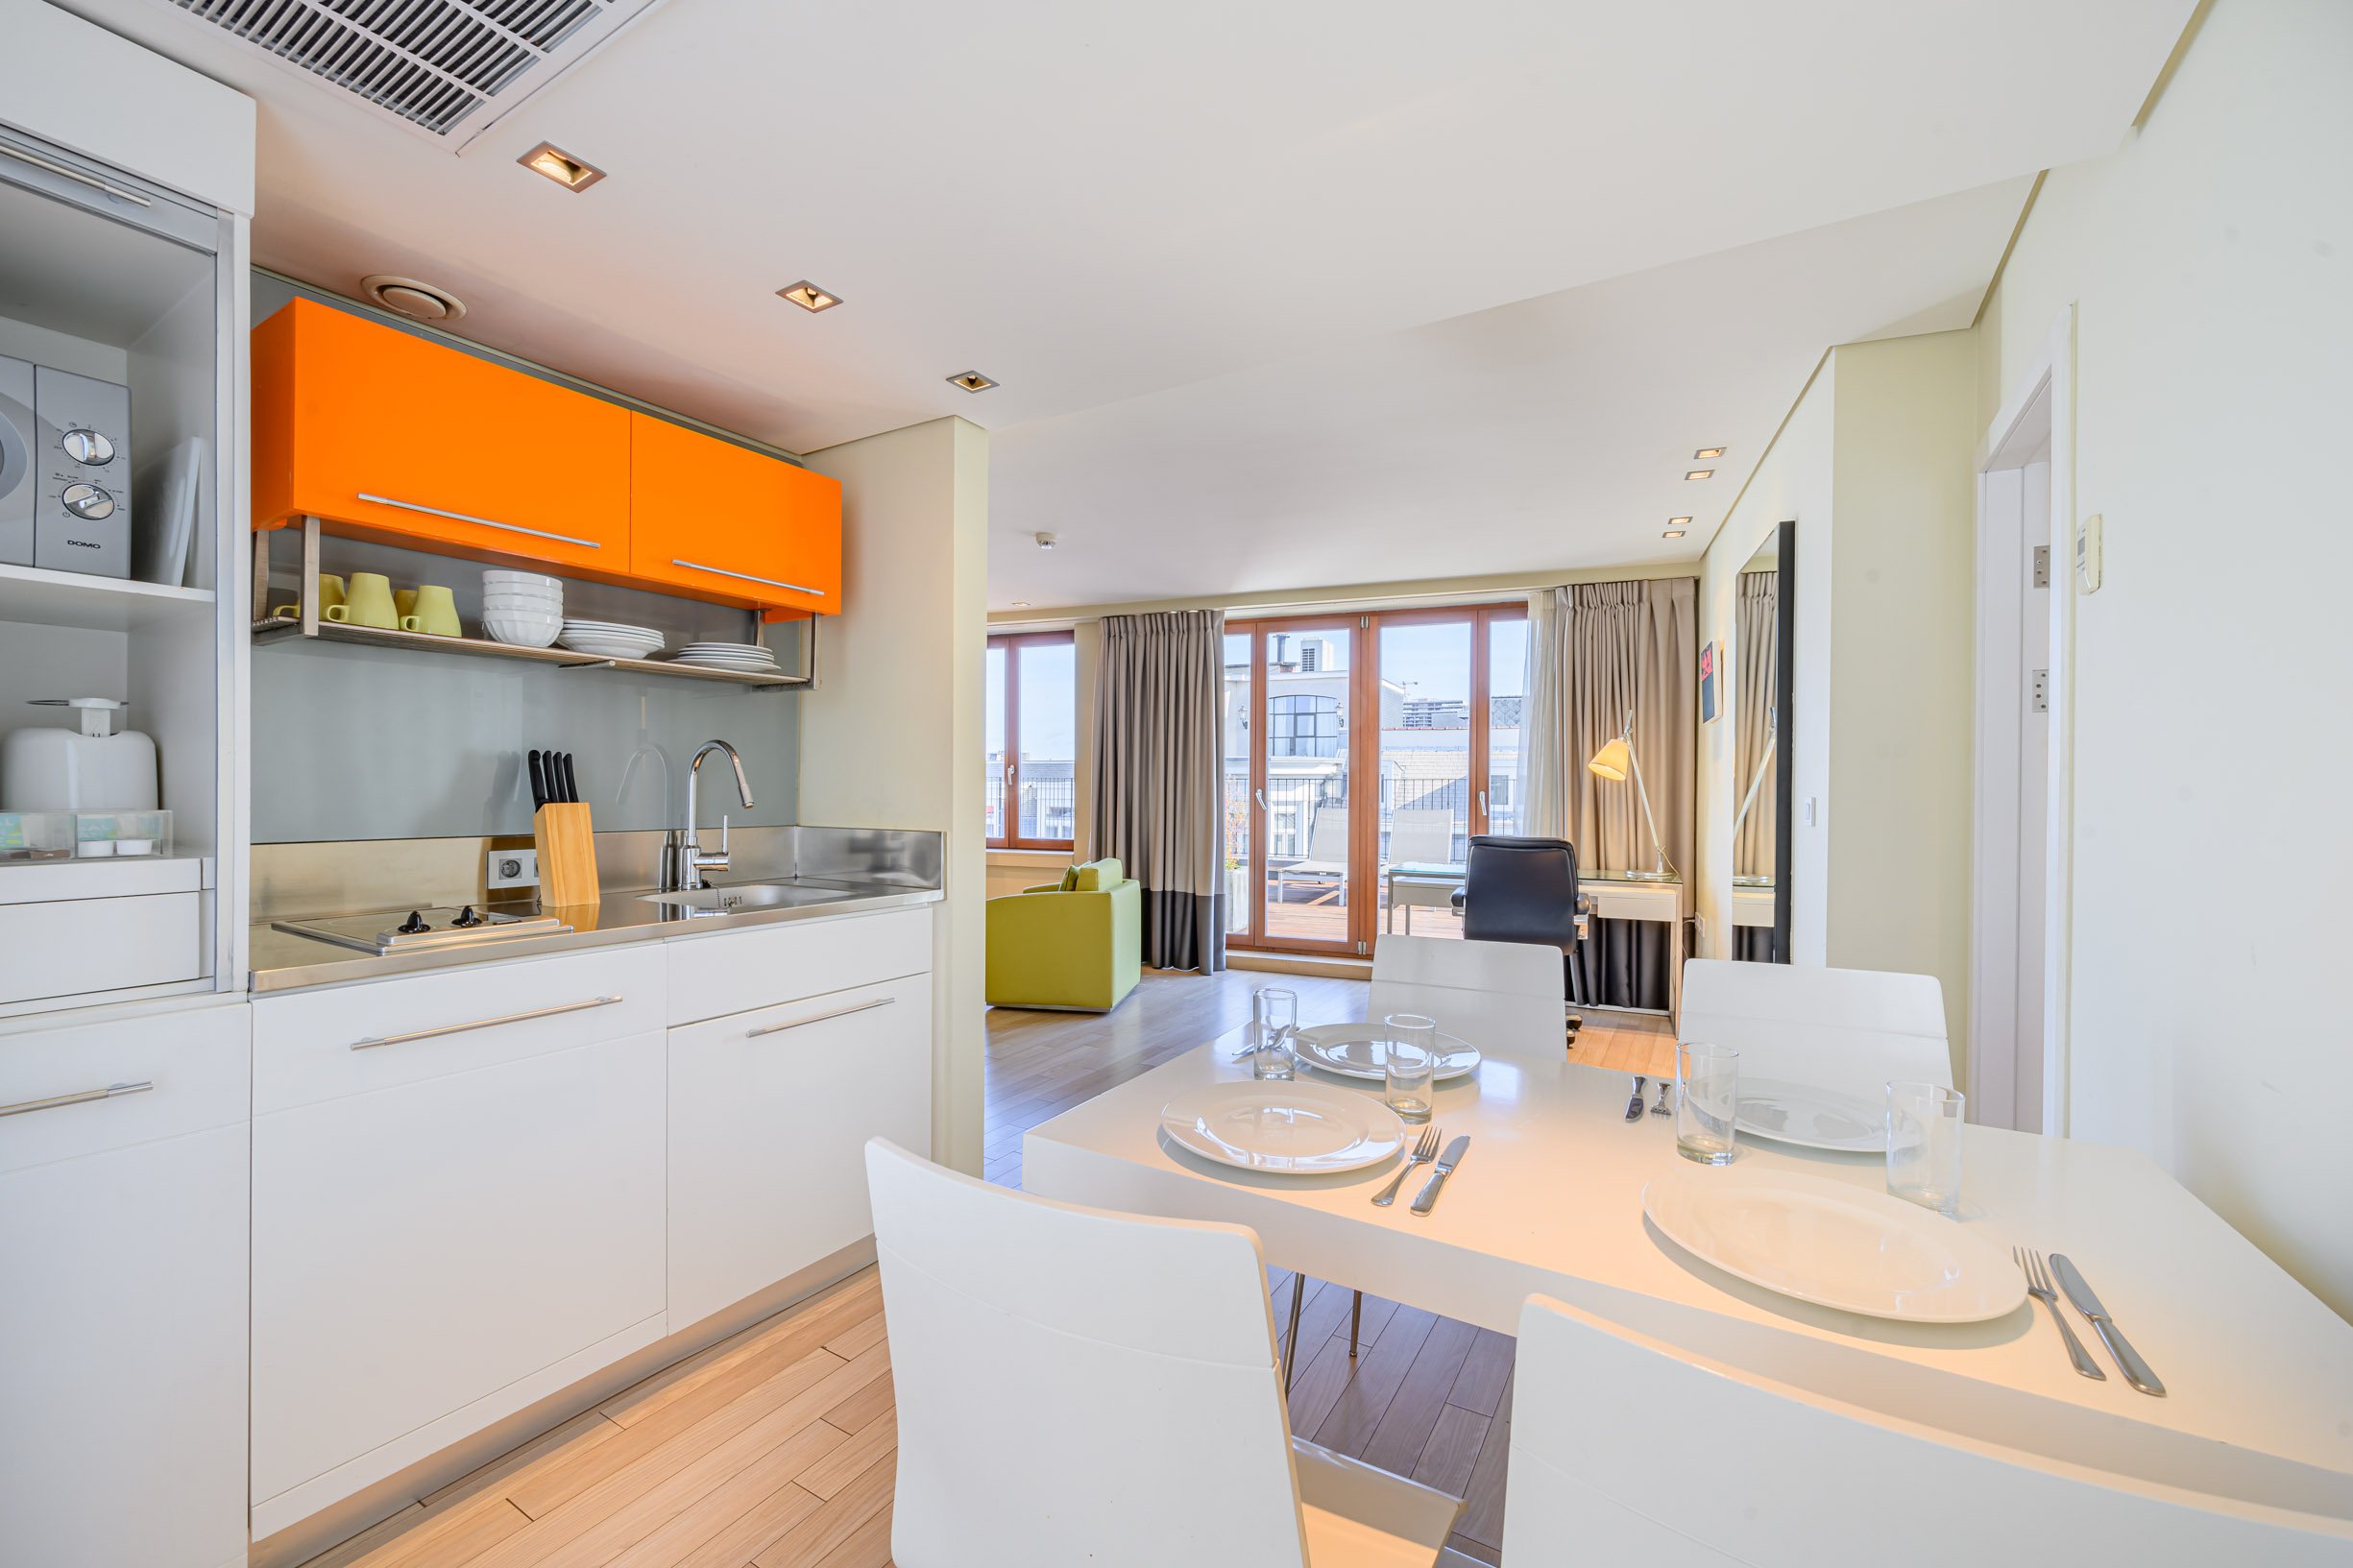 104/Grand-Place/Grand-Place (new 2019)/BAparthotels_Grand_Place_Penthouse_Kitchen_1_LD.jpg